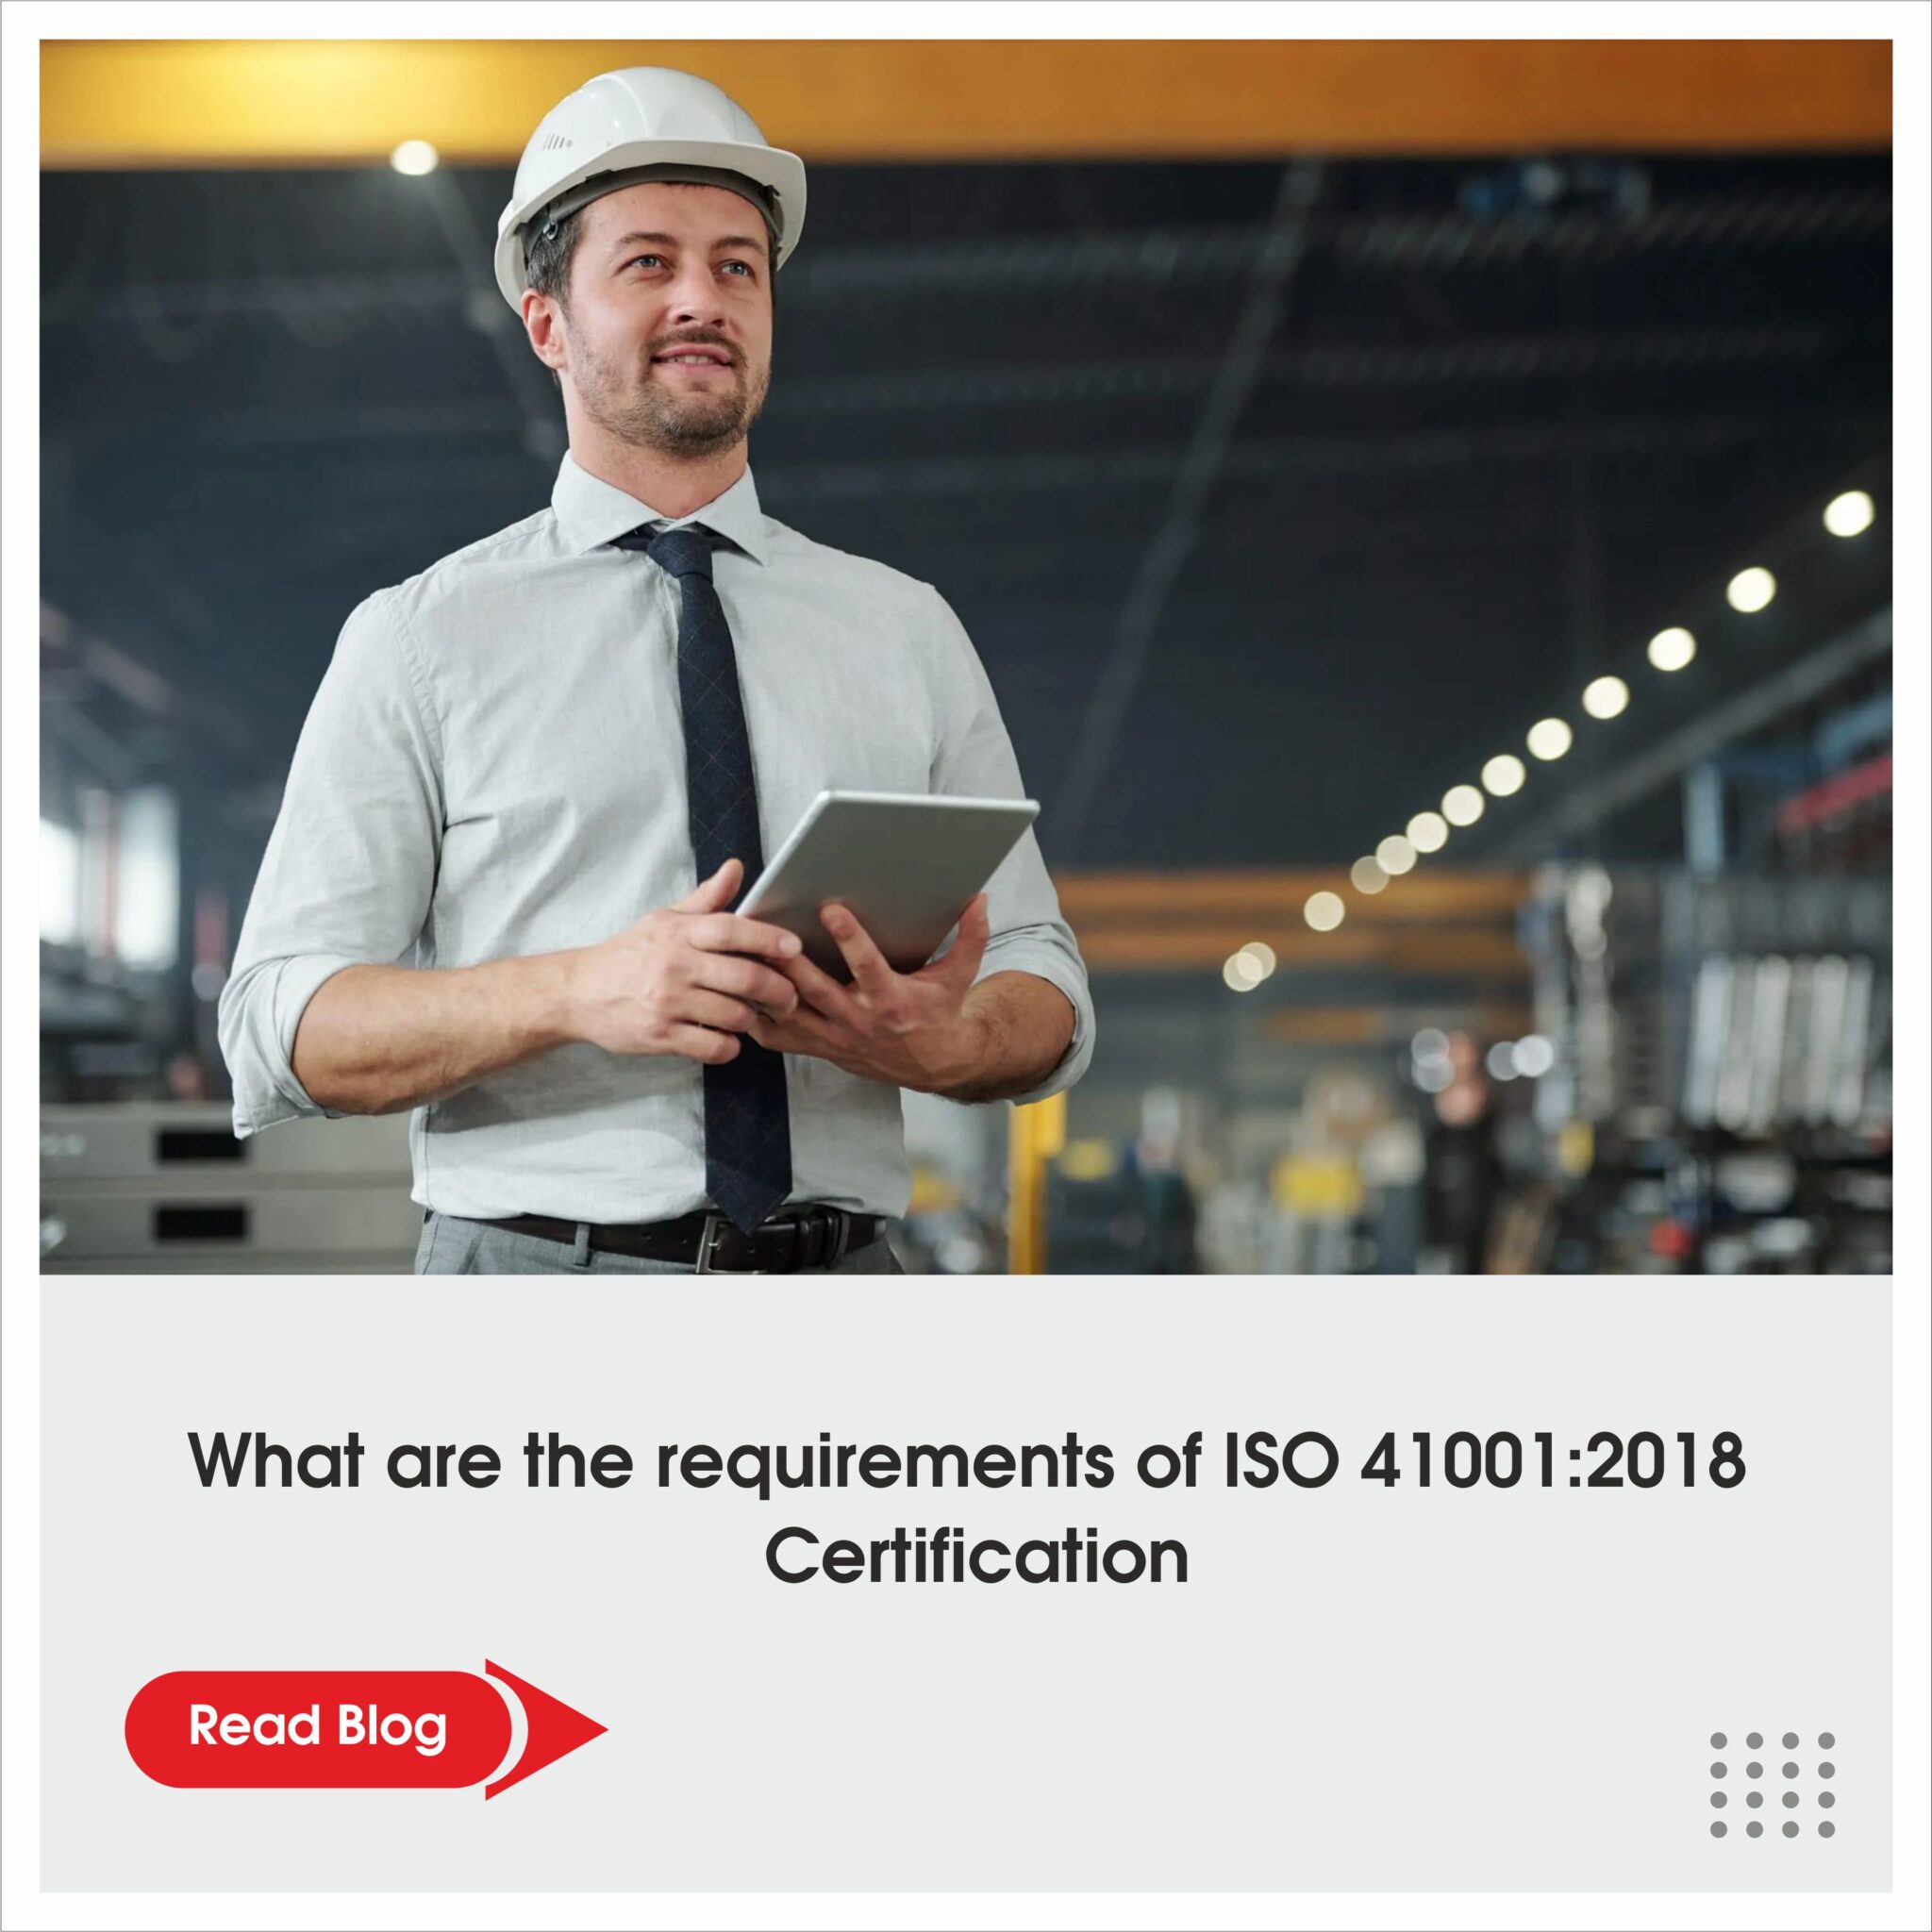 What are the requirements of ISO 41001:2018 Certification?